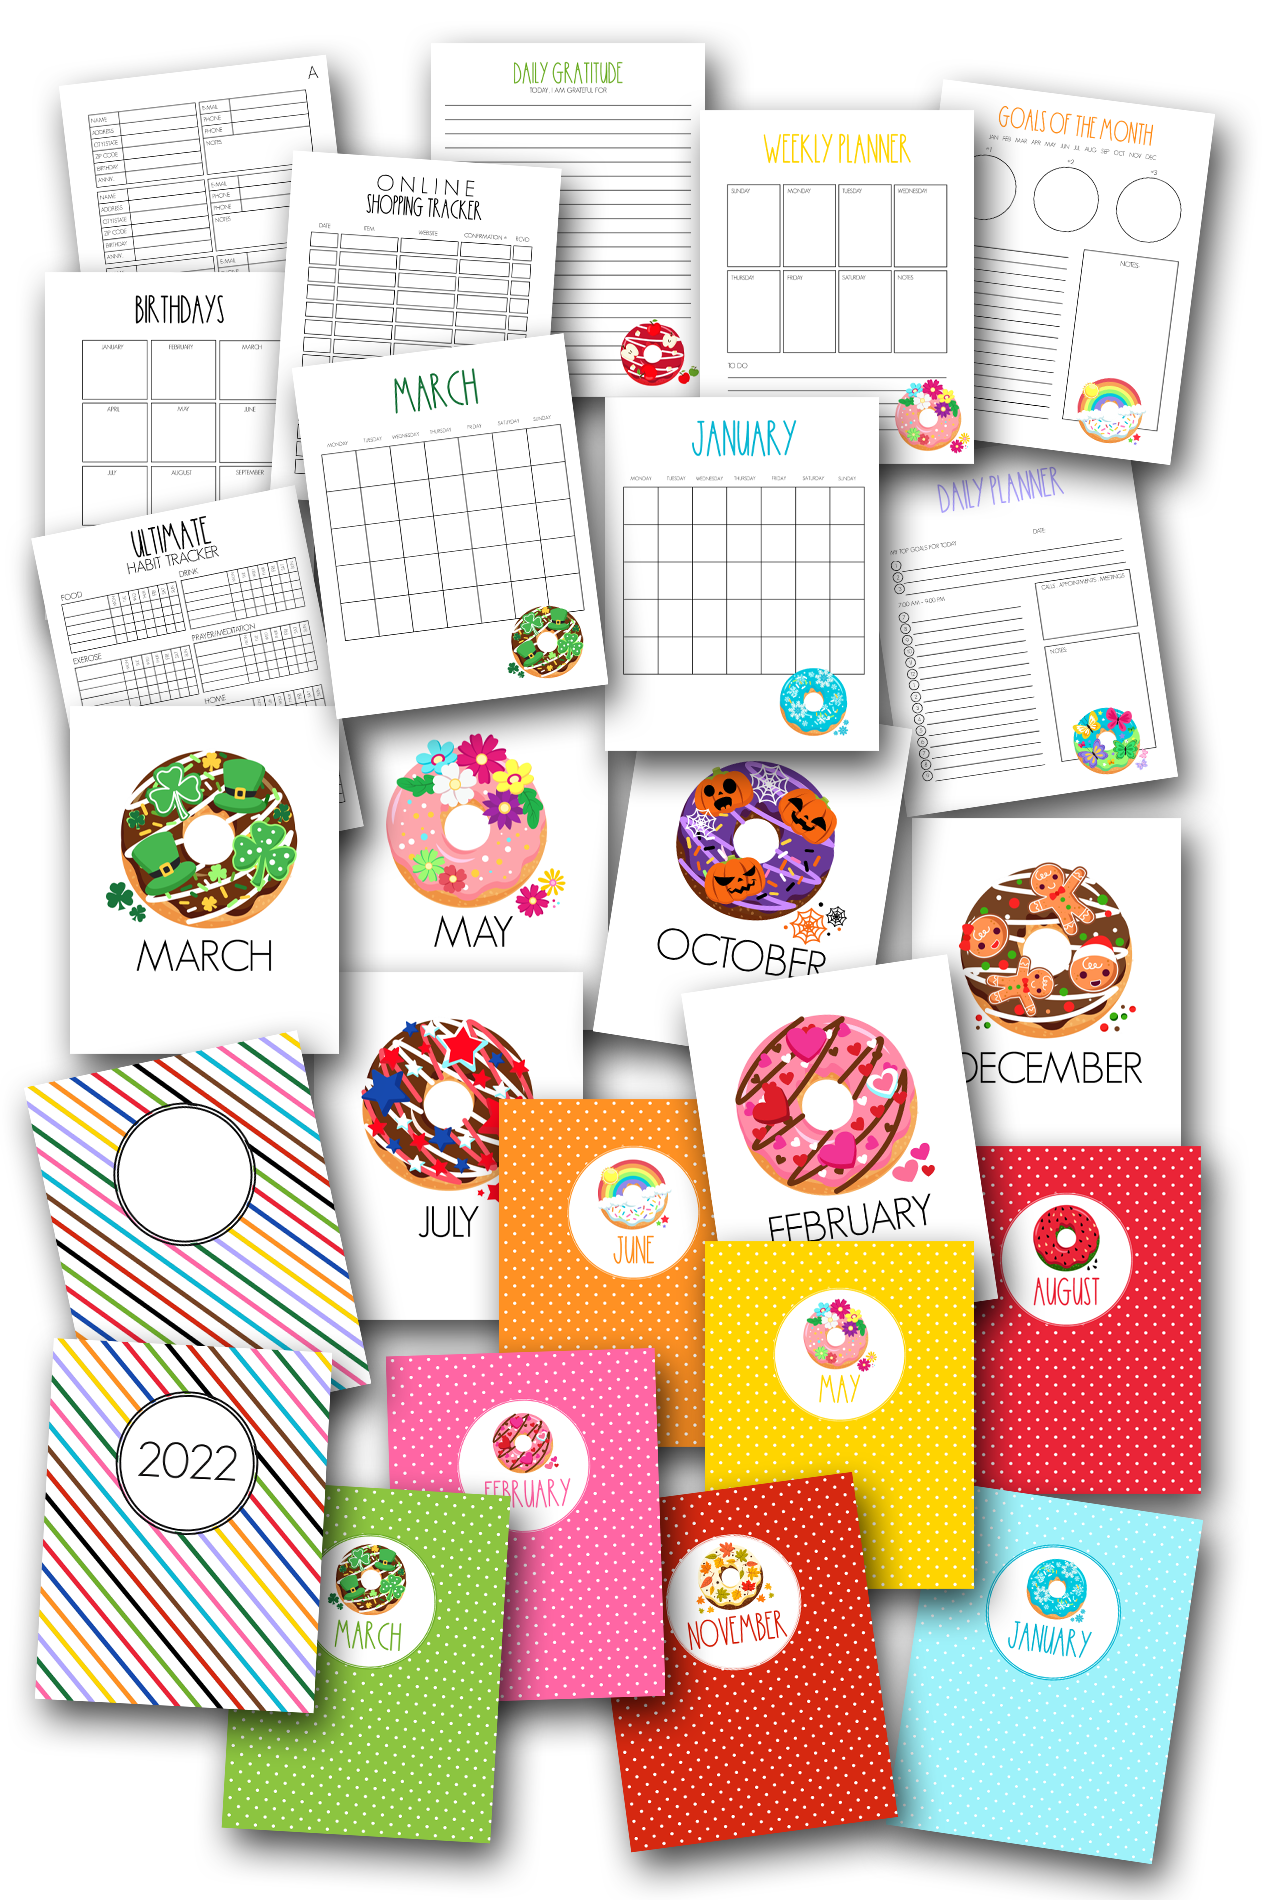 Year of the Donut Home Organization Planner Journal